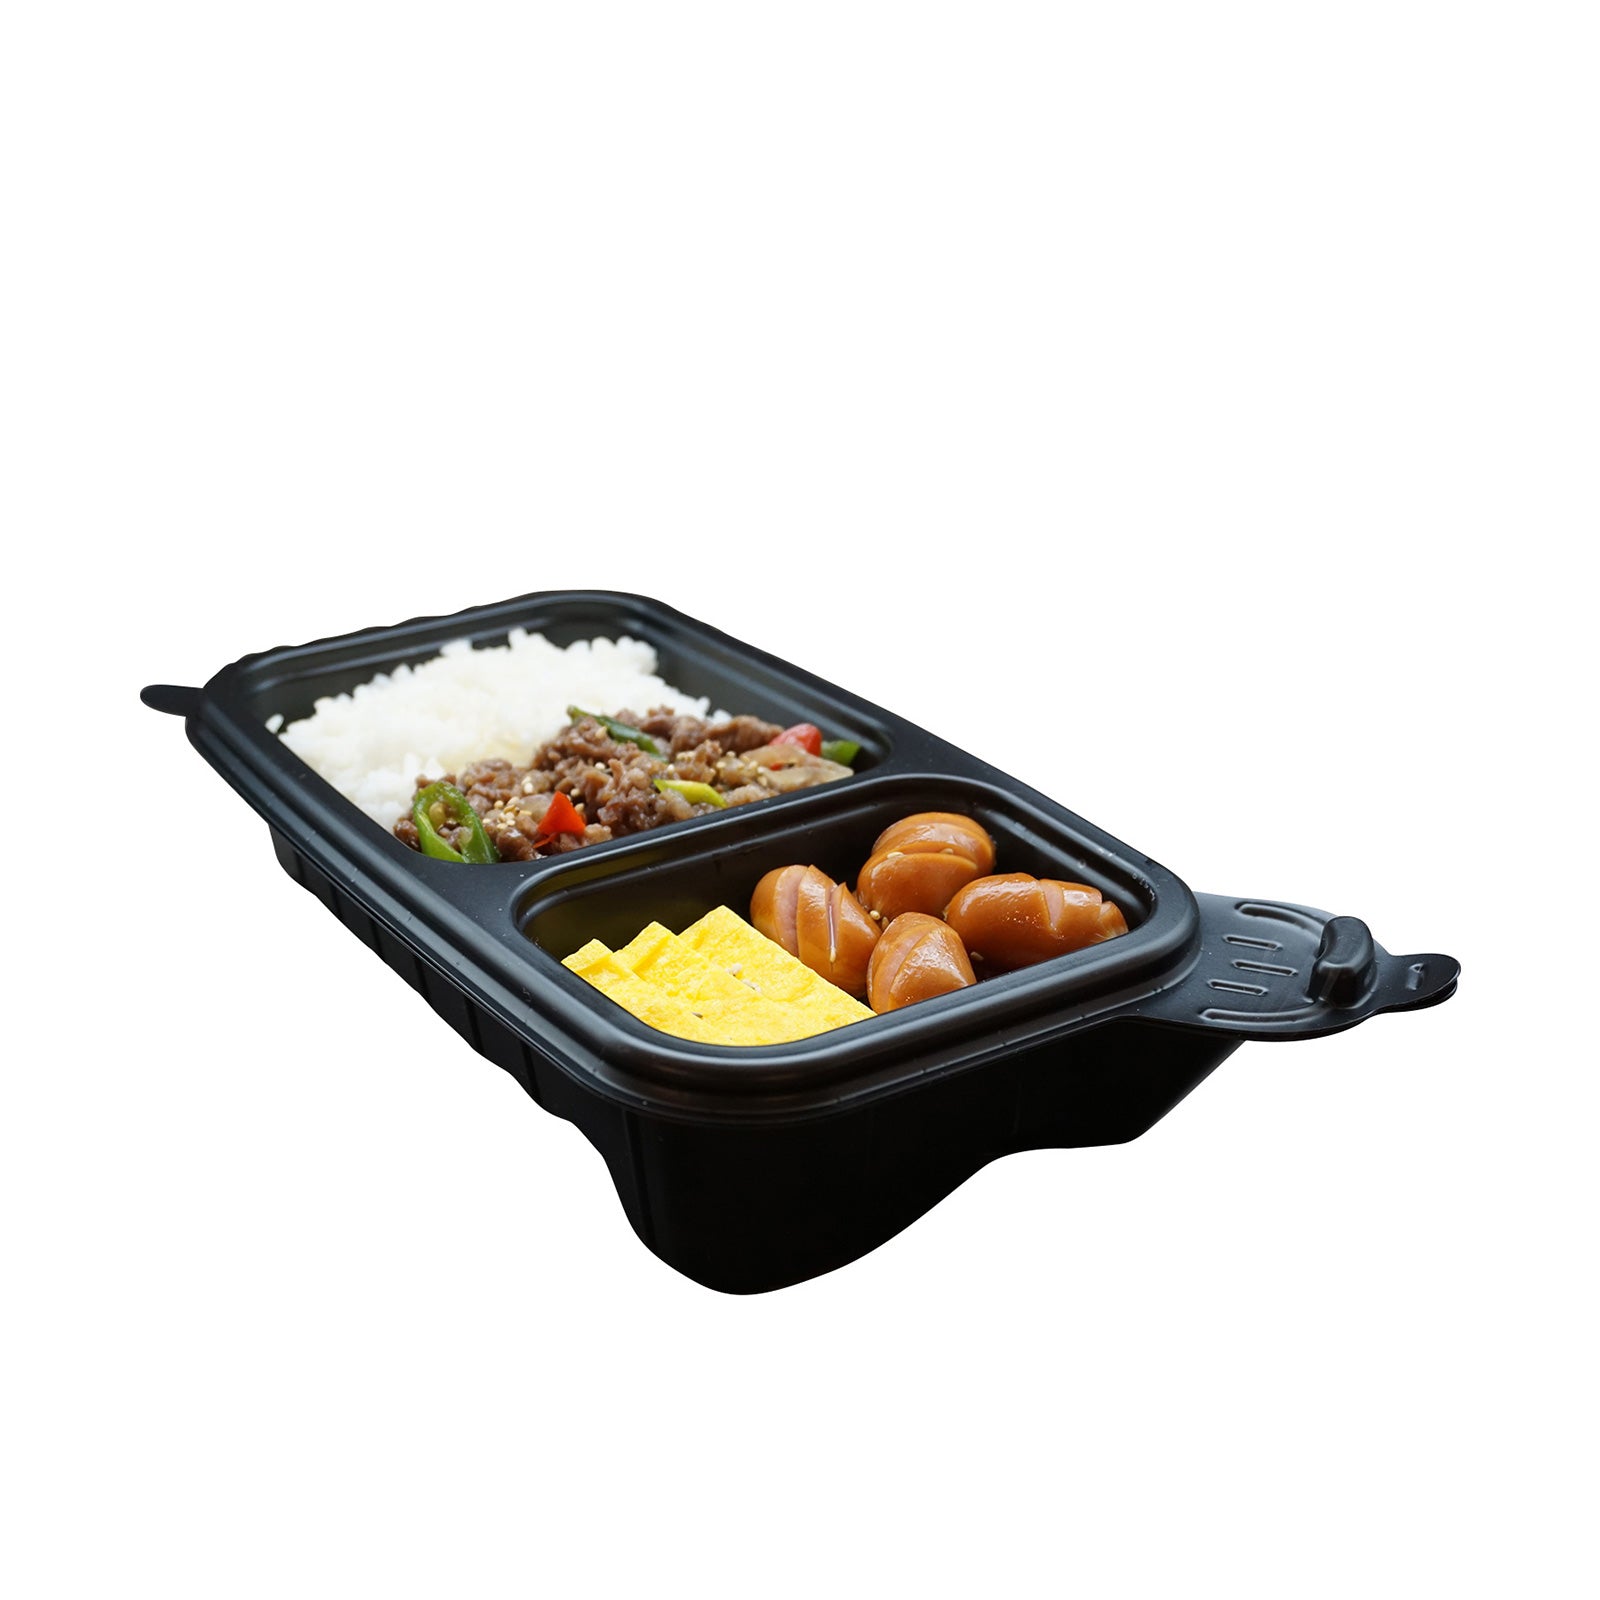 60 Pack Dalat Heating Lunch Box Container 26cm B